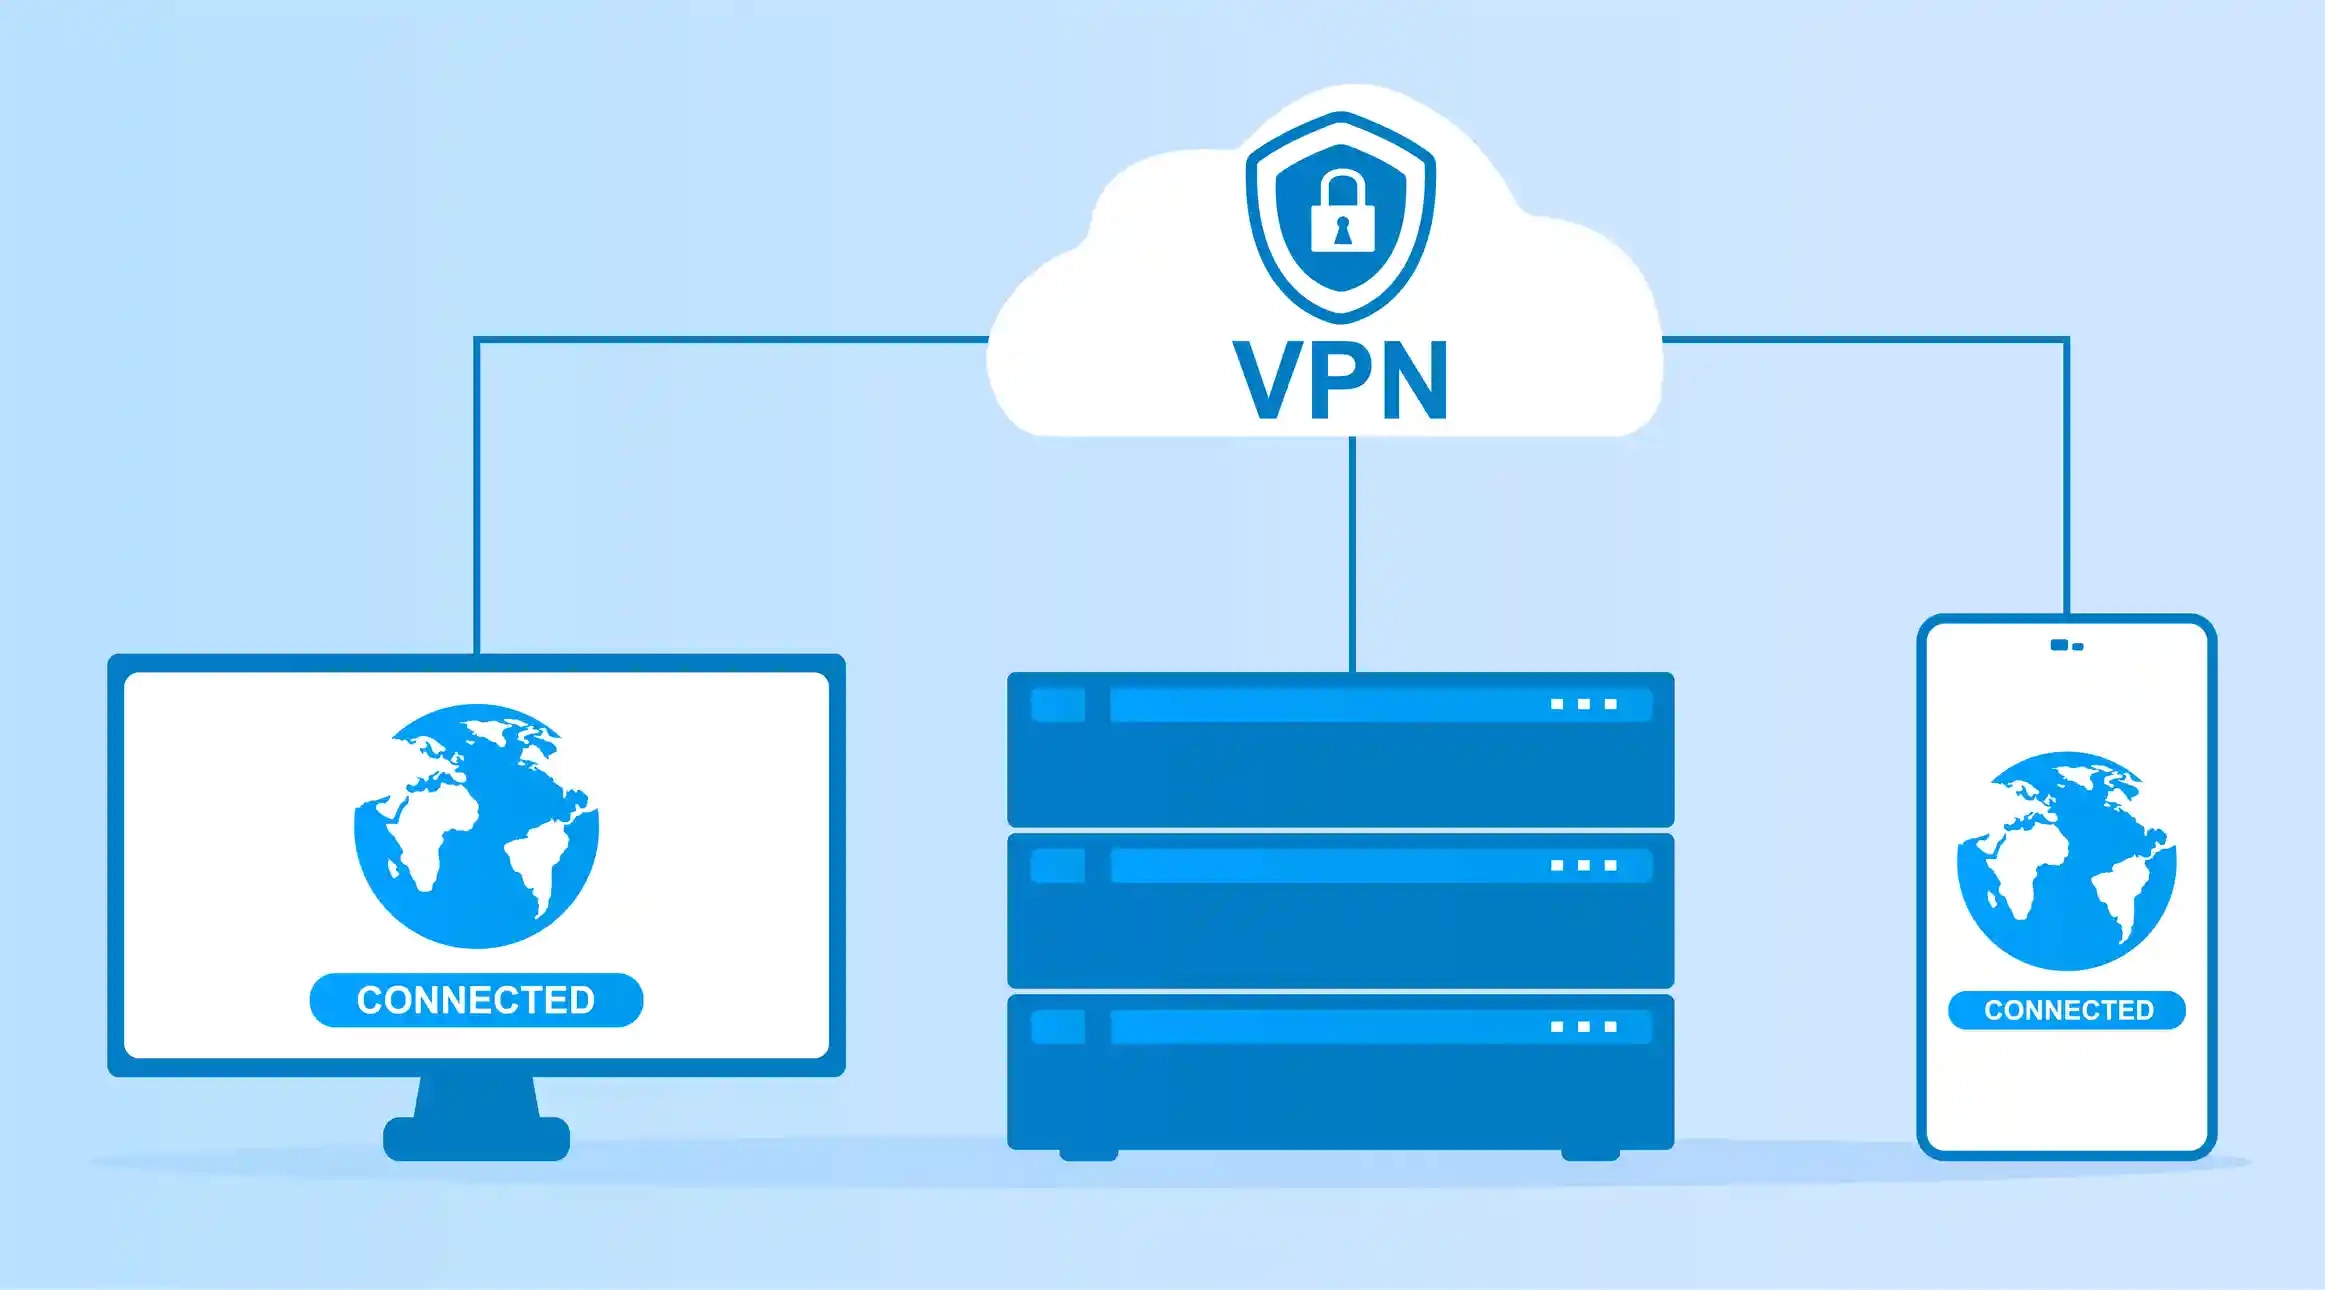 The Ultimate Guide to Choosing the Best VPN: Top VPN Recommendations